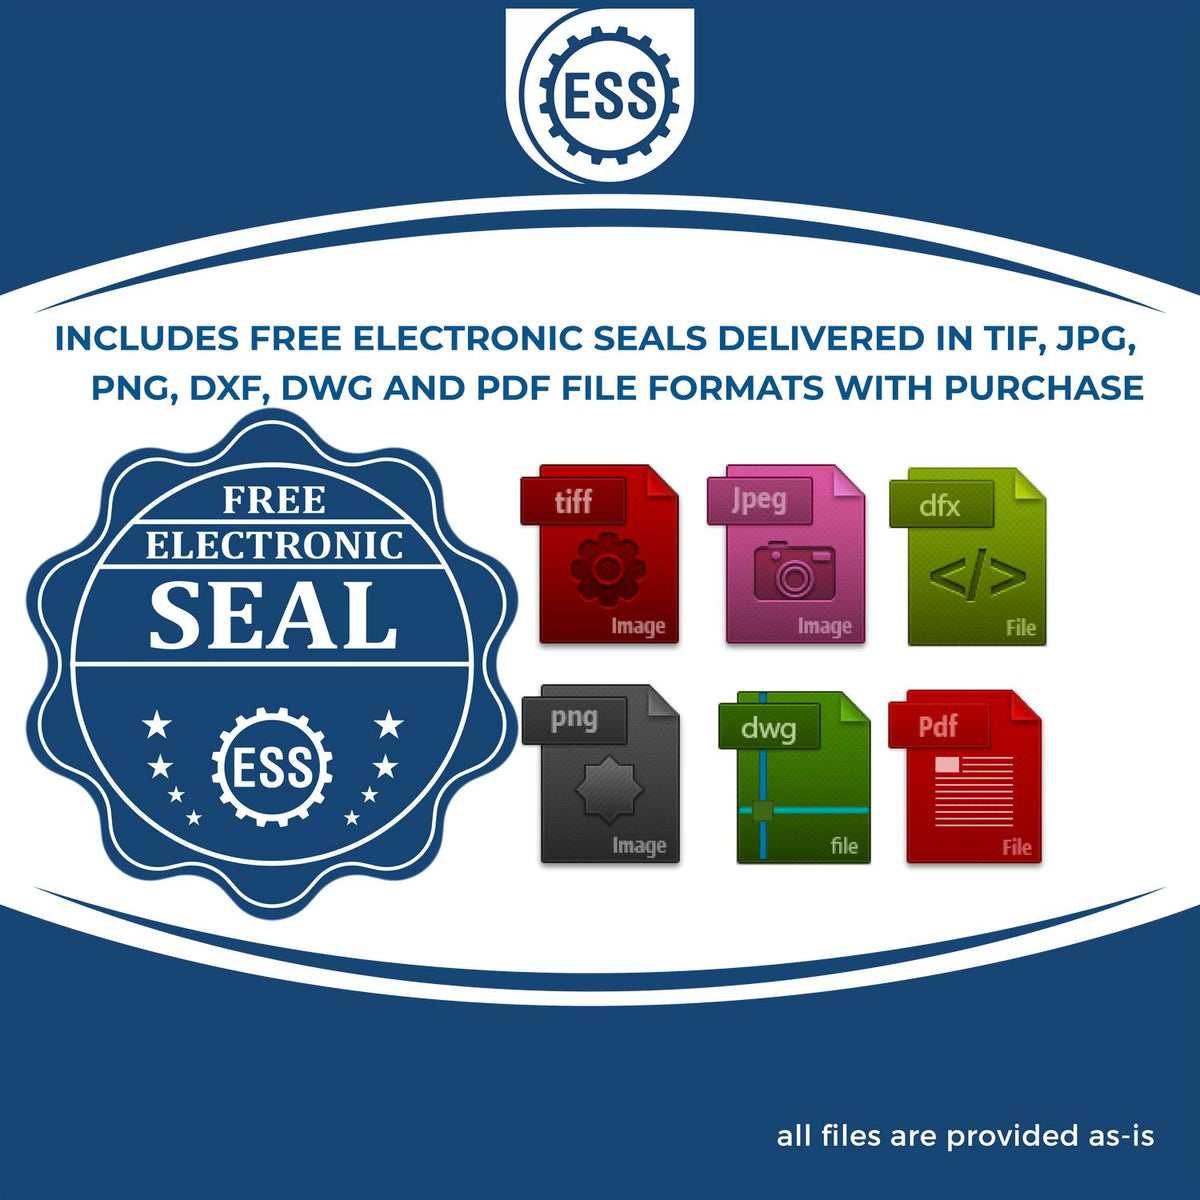 An infographic for the free electronic seal for the District of Columbia Long Reach Architectural Embossing Seal illustrating the different file type icons such as DXF, DWG, TIF, JPG and PNG.